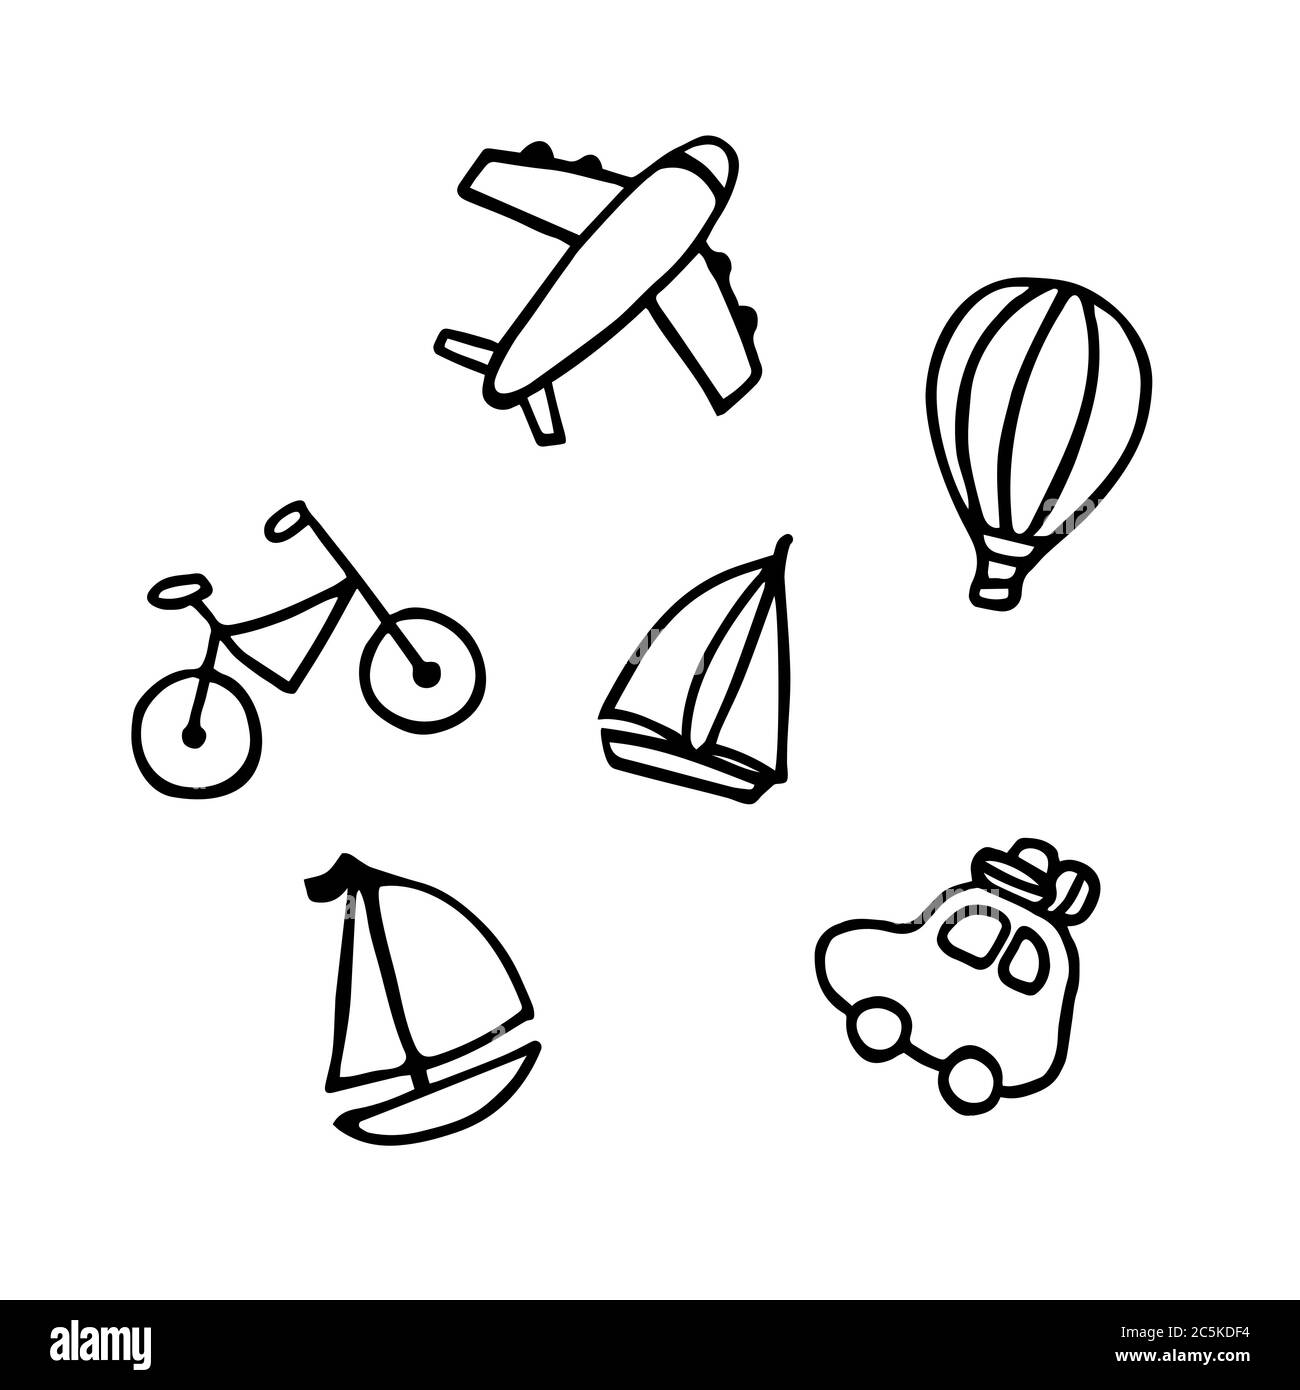 Summer collection. Hand drawn icon set with yacht, bicycle, baloon, car, plane. Sticker pack for print and digital. Stock Vector